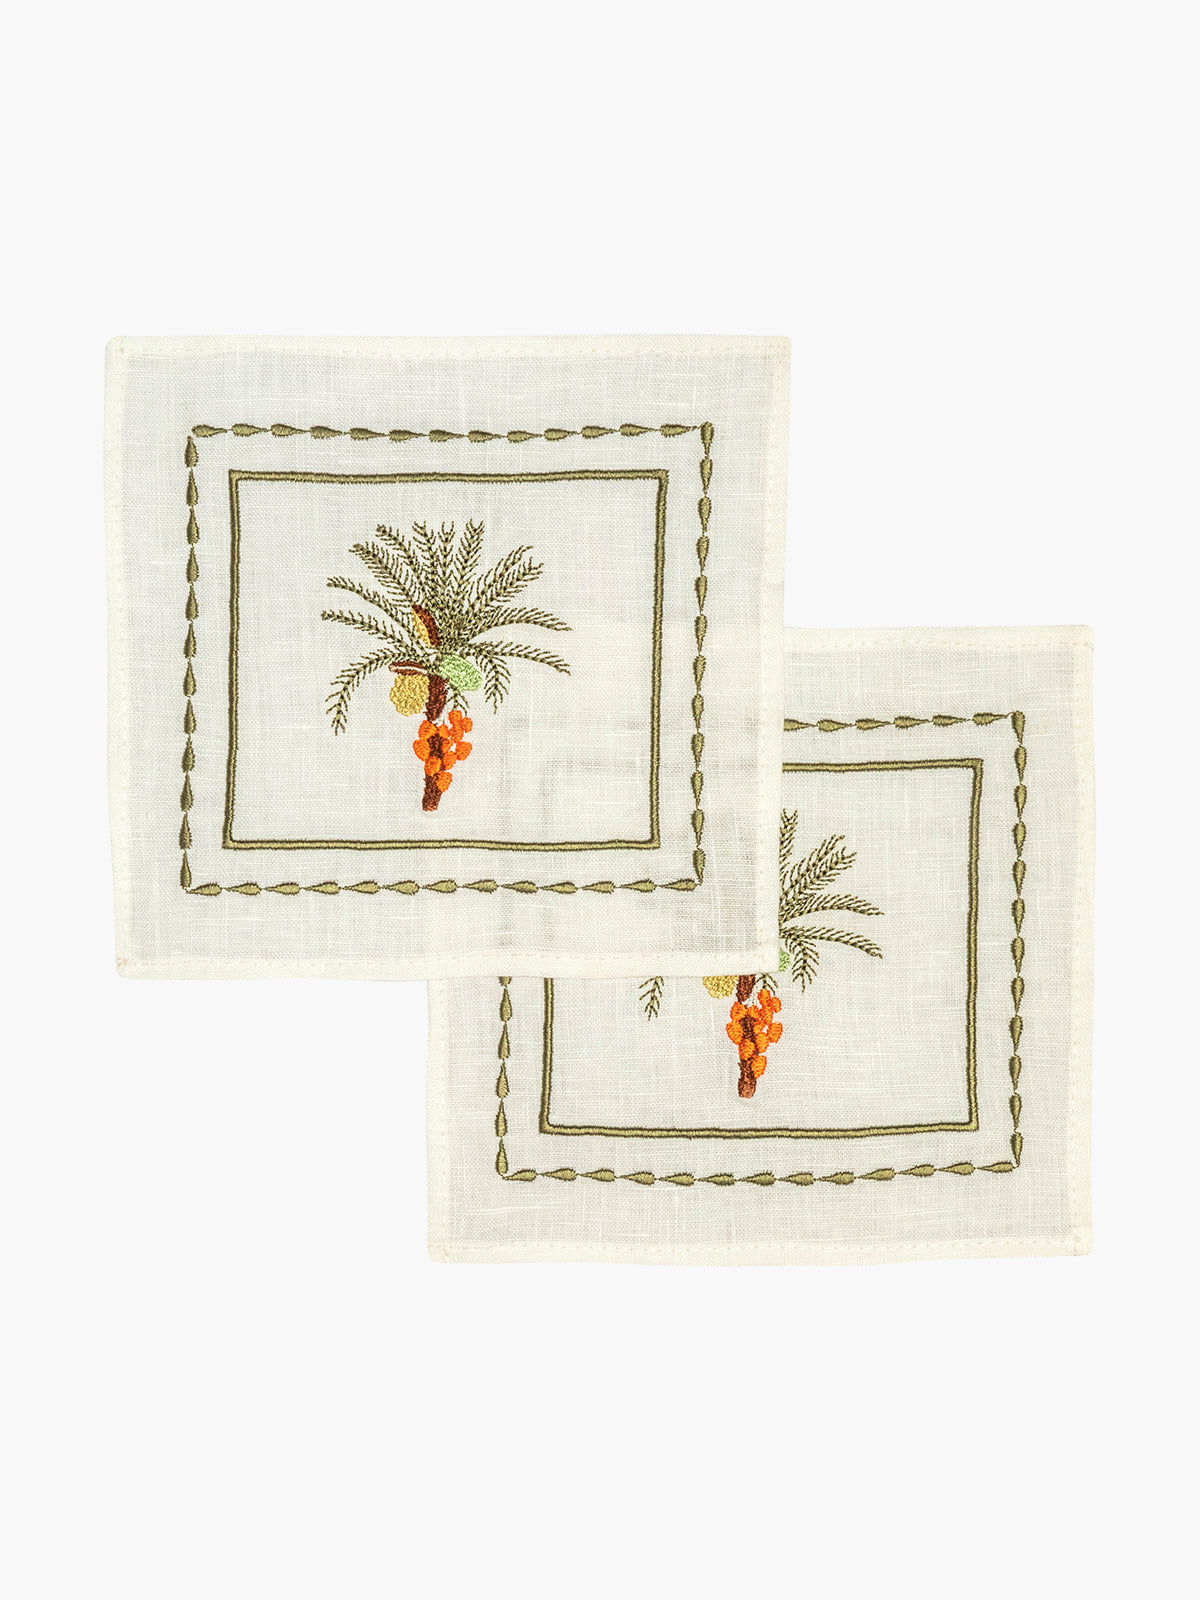 Embroidered Cocktail Napkins | Palm Tree Embroidered Cocktail Napkins | Palm Tree